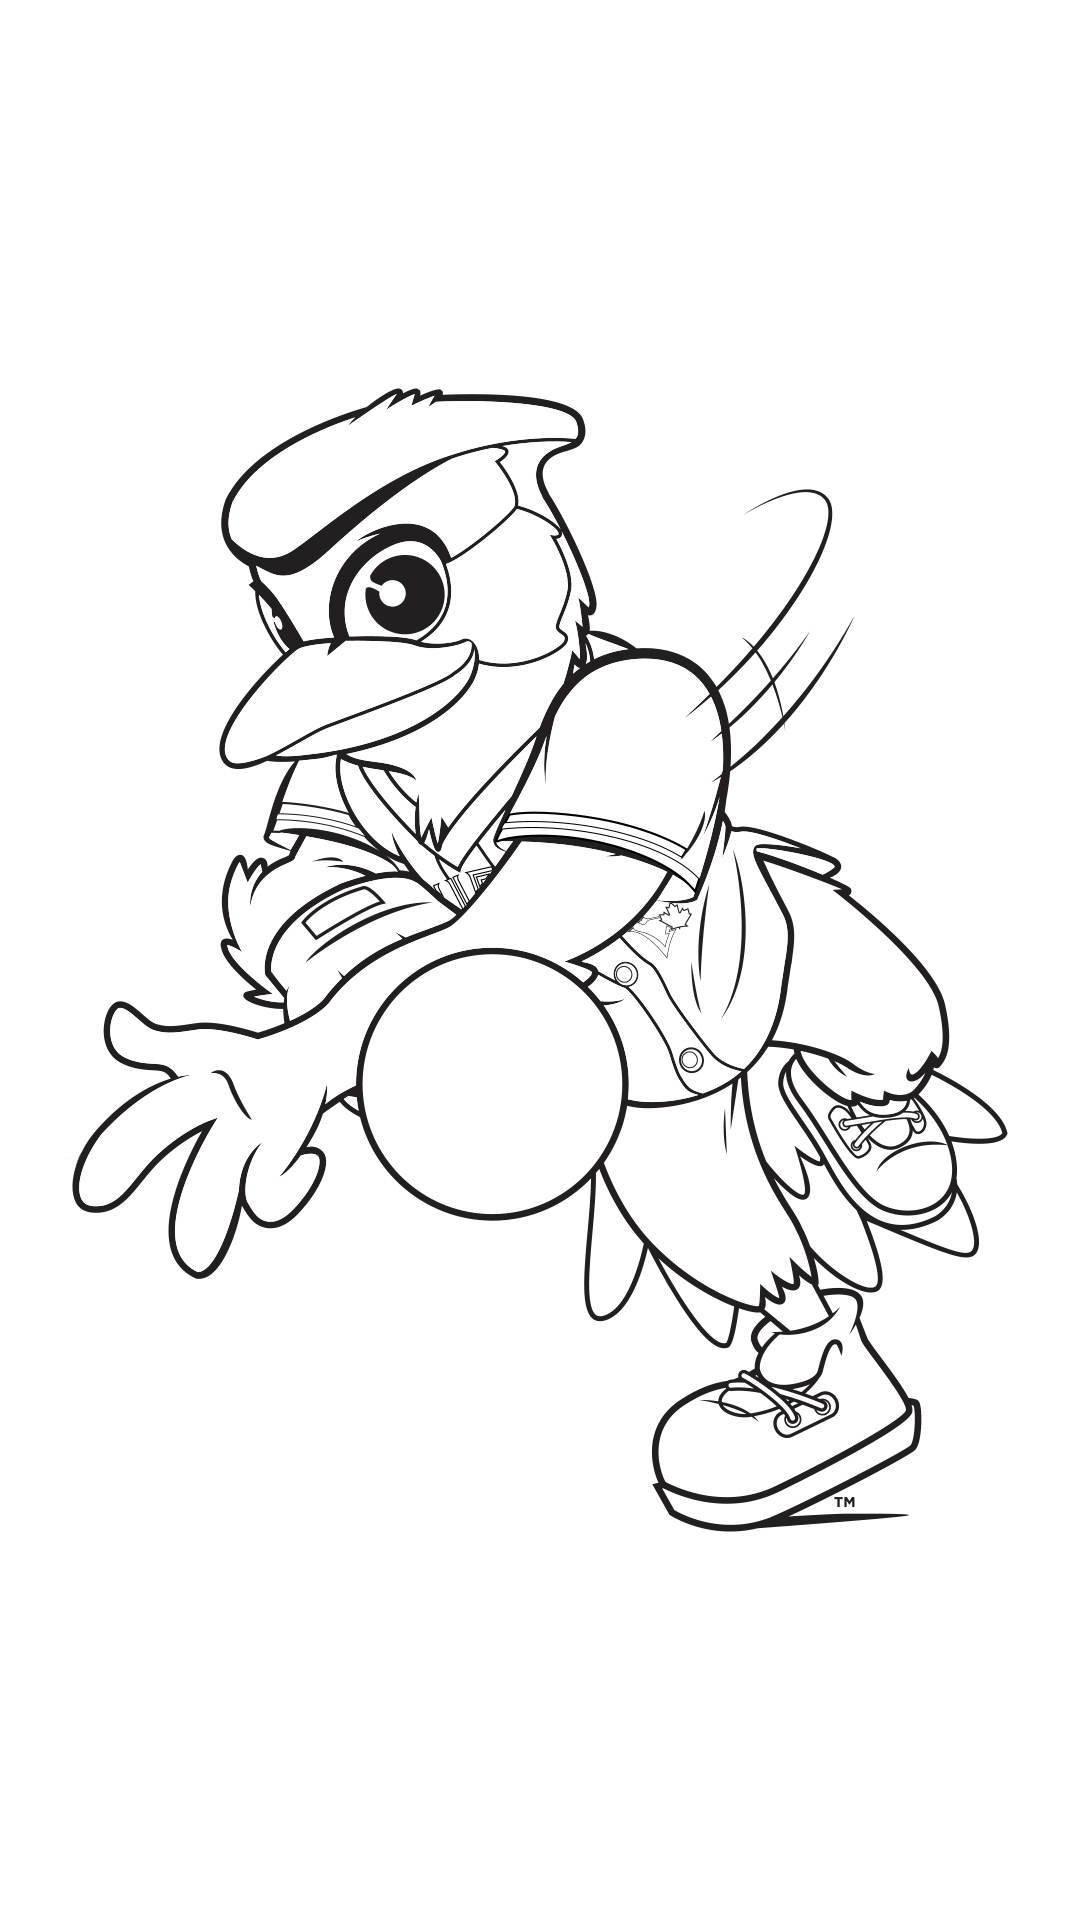 Toronto Blue Jays Coloring Pages at GetDrawings | Free download